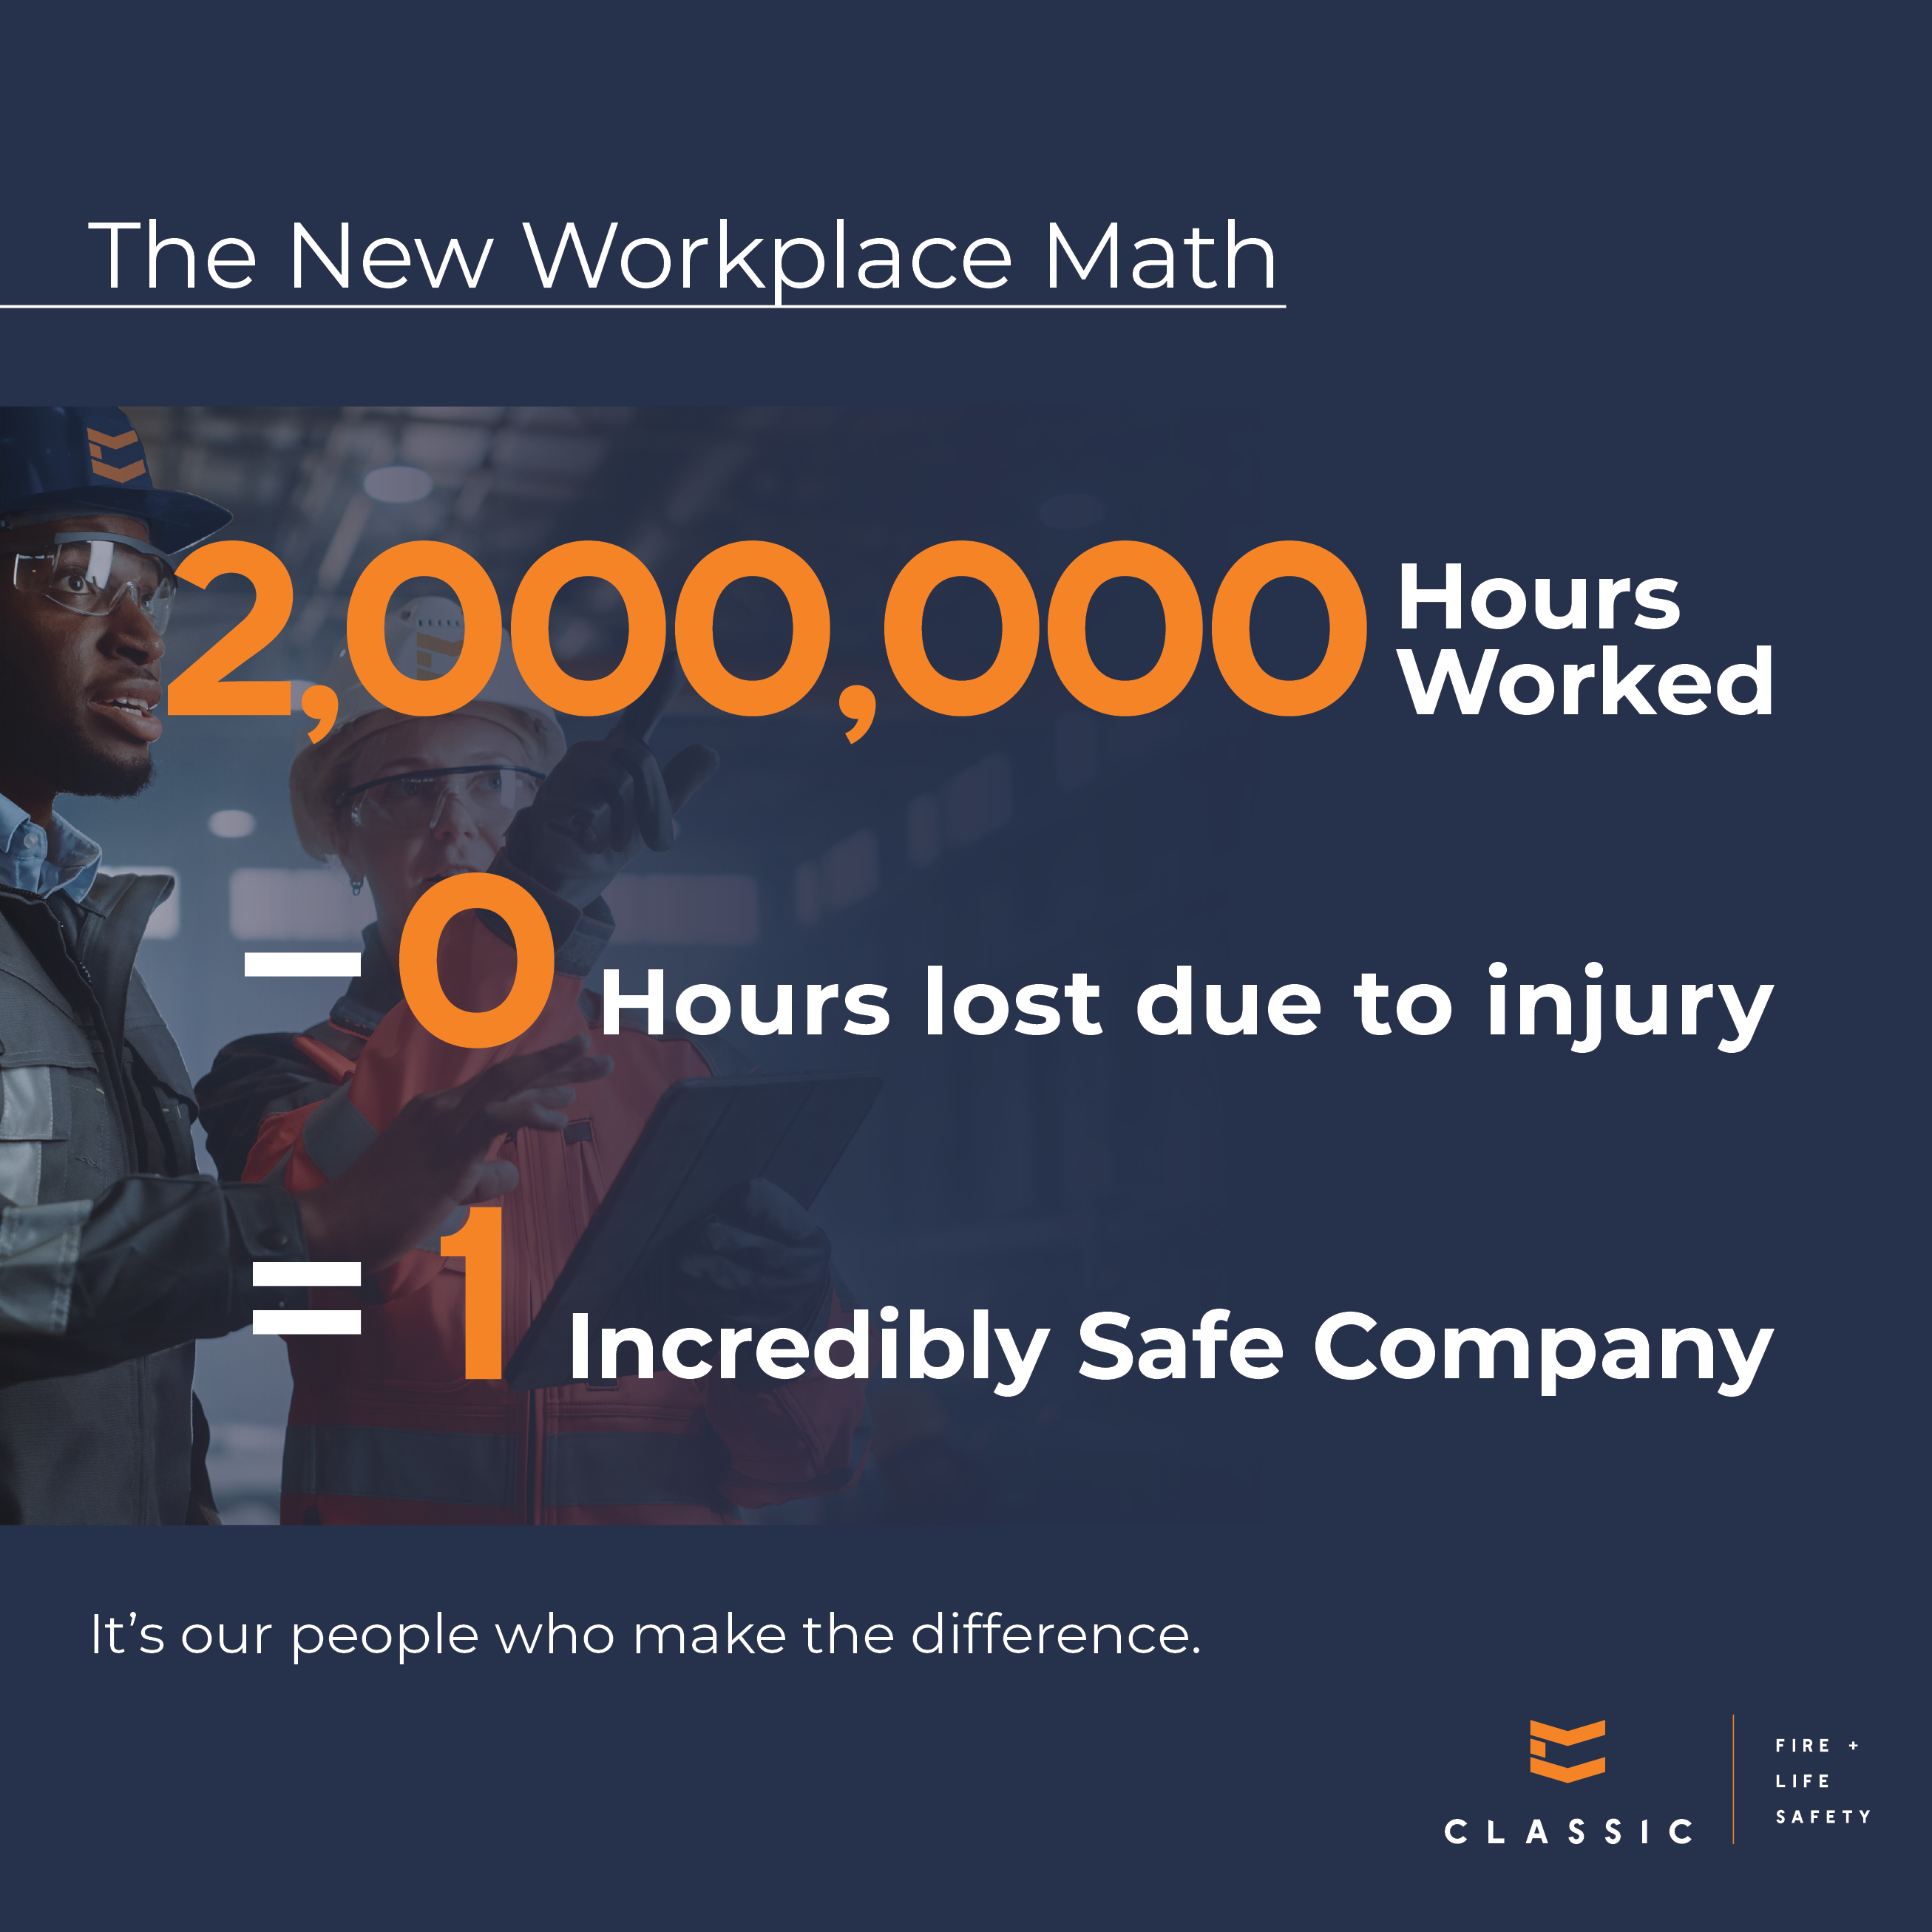 The new workplace math